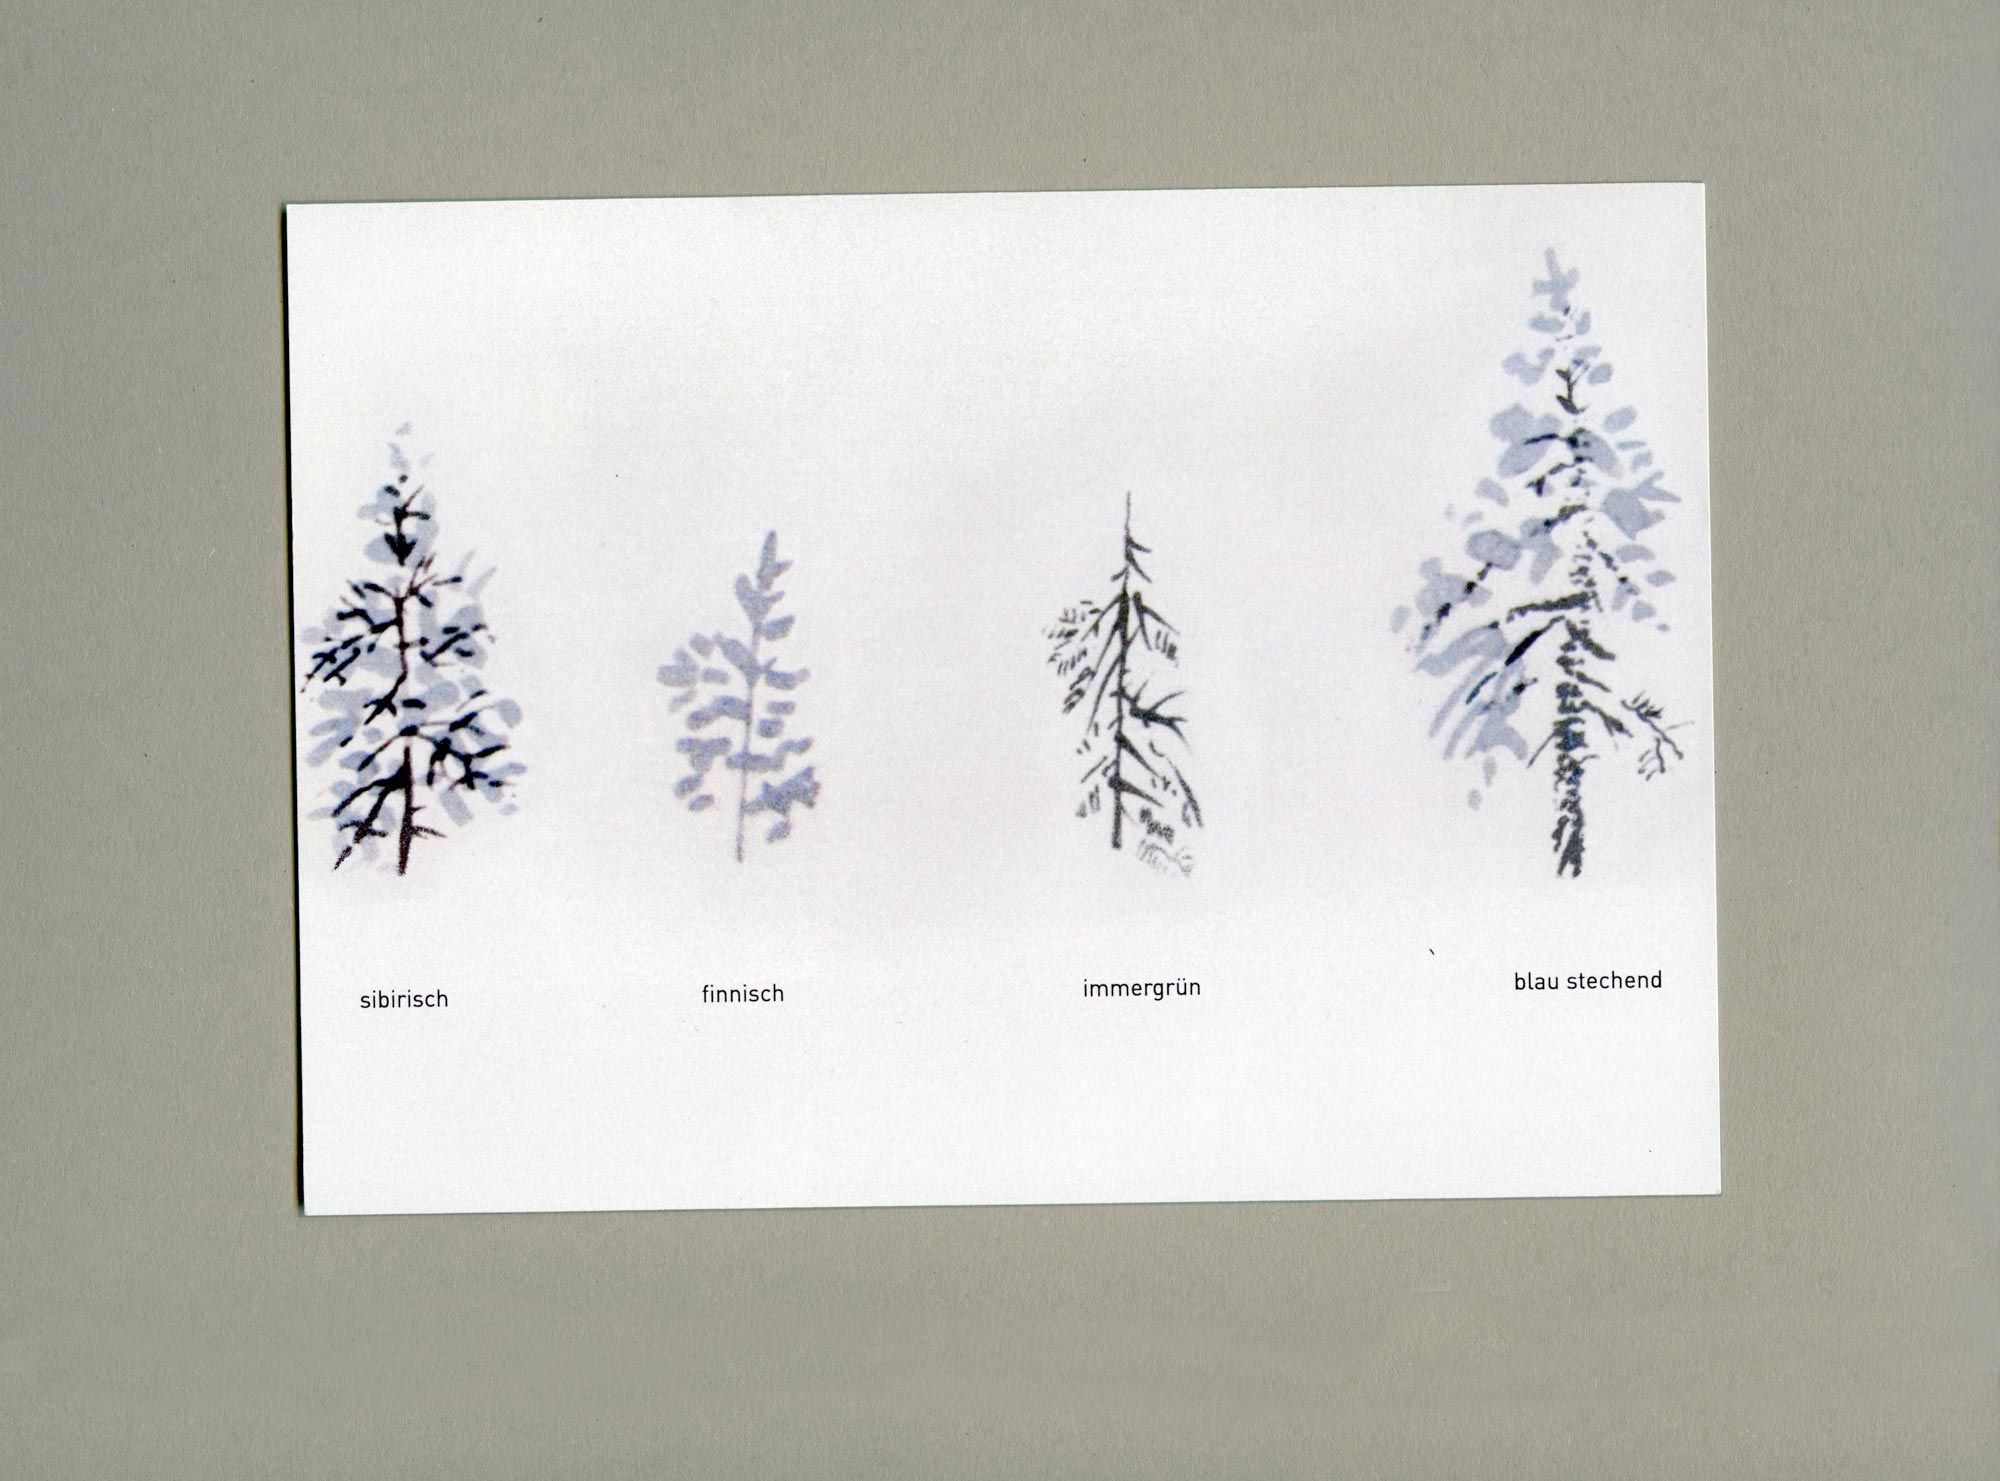 Aquarell Illustration. 4 different trees. A word under each tree.